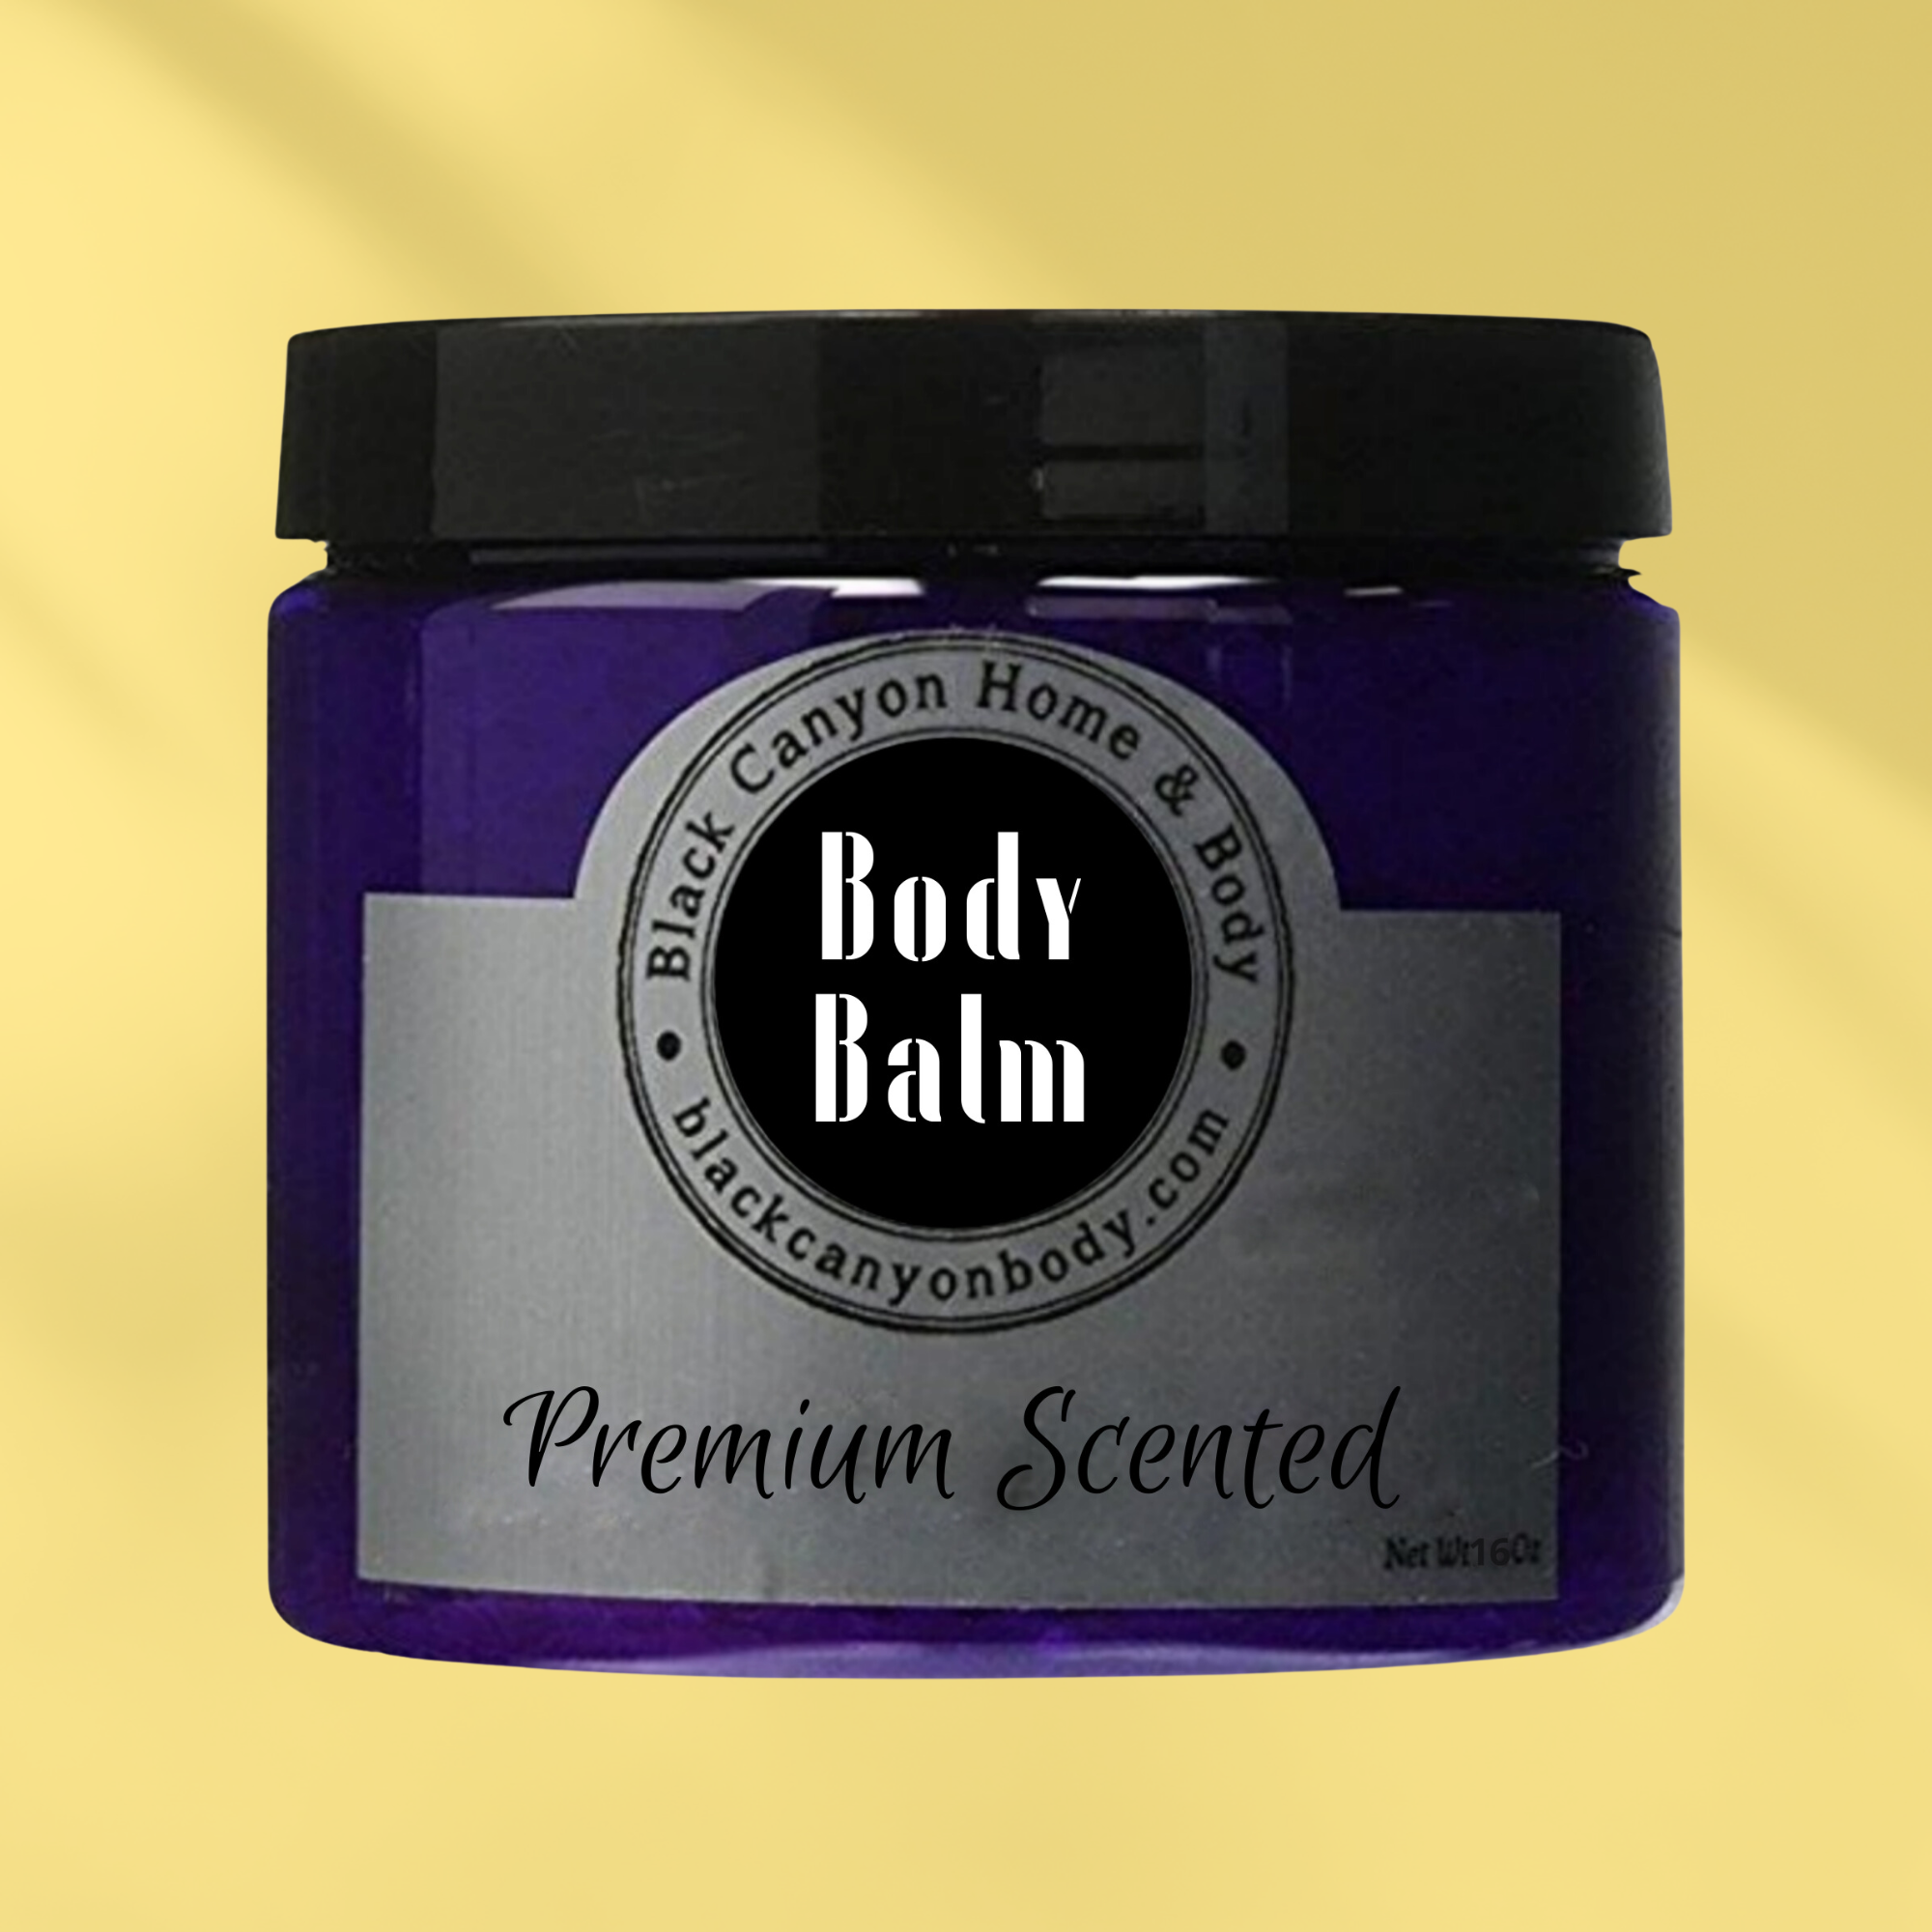 Paydens Cobalt Grapefruit & Spiced Woods Scented Natural Body Balm with Shea For Men